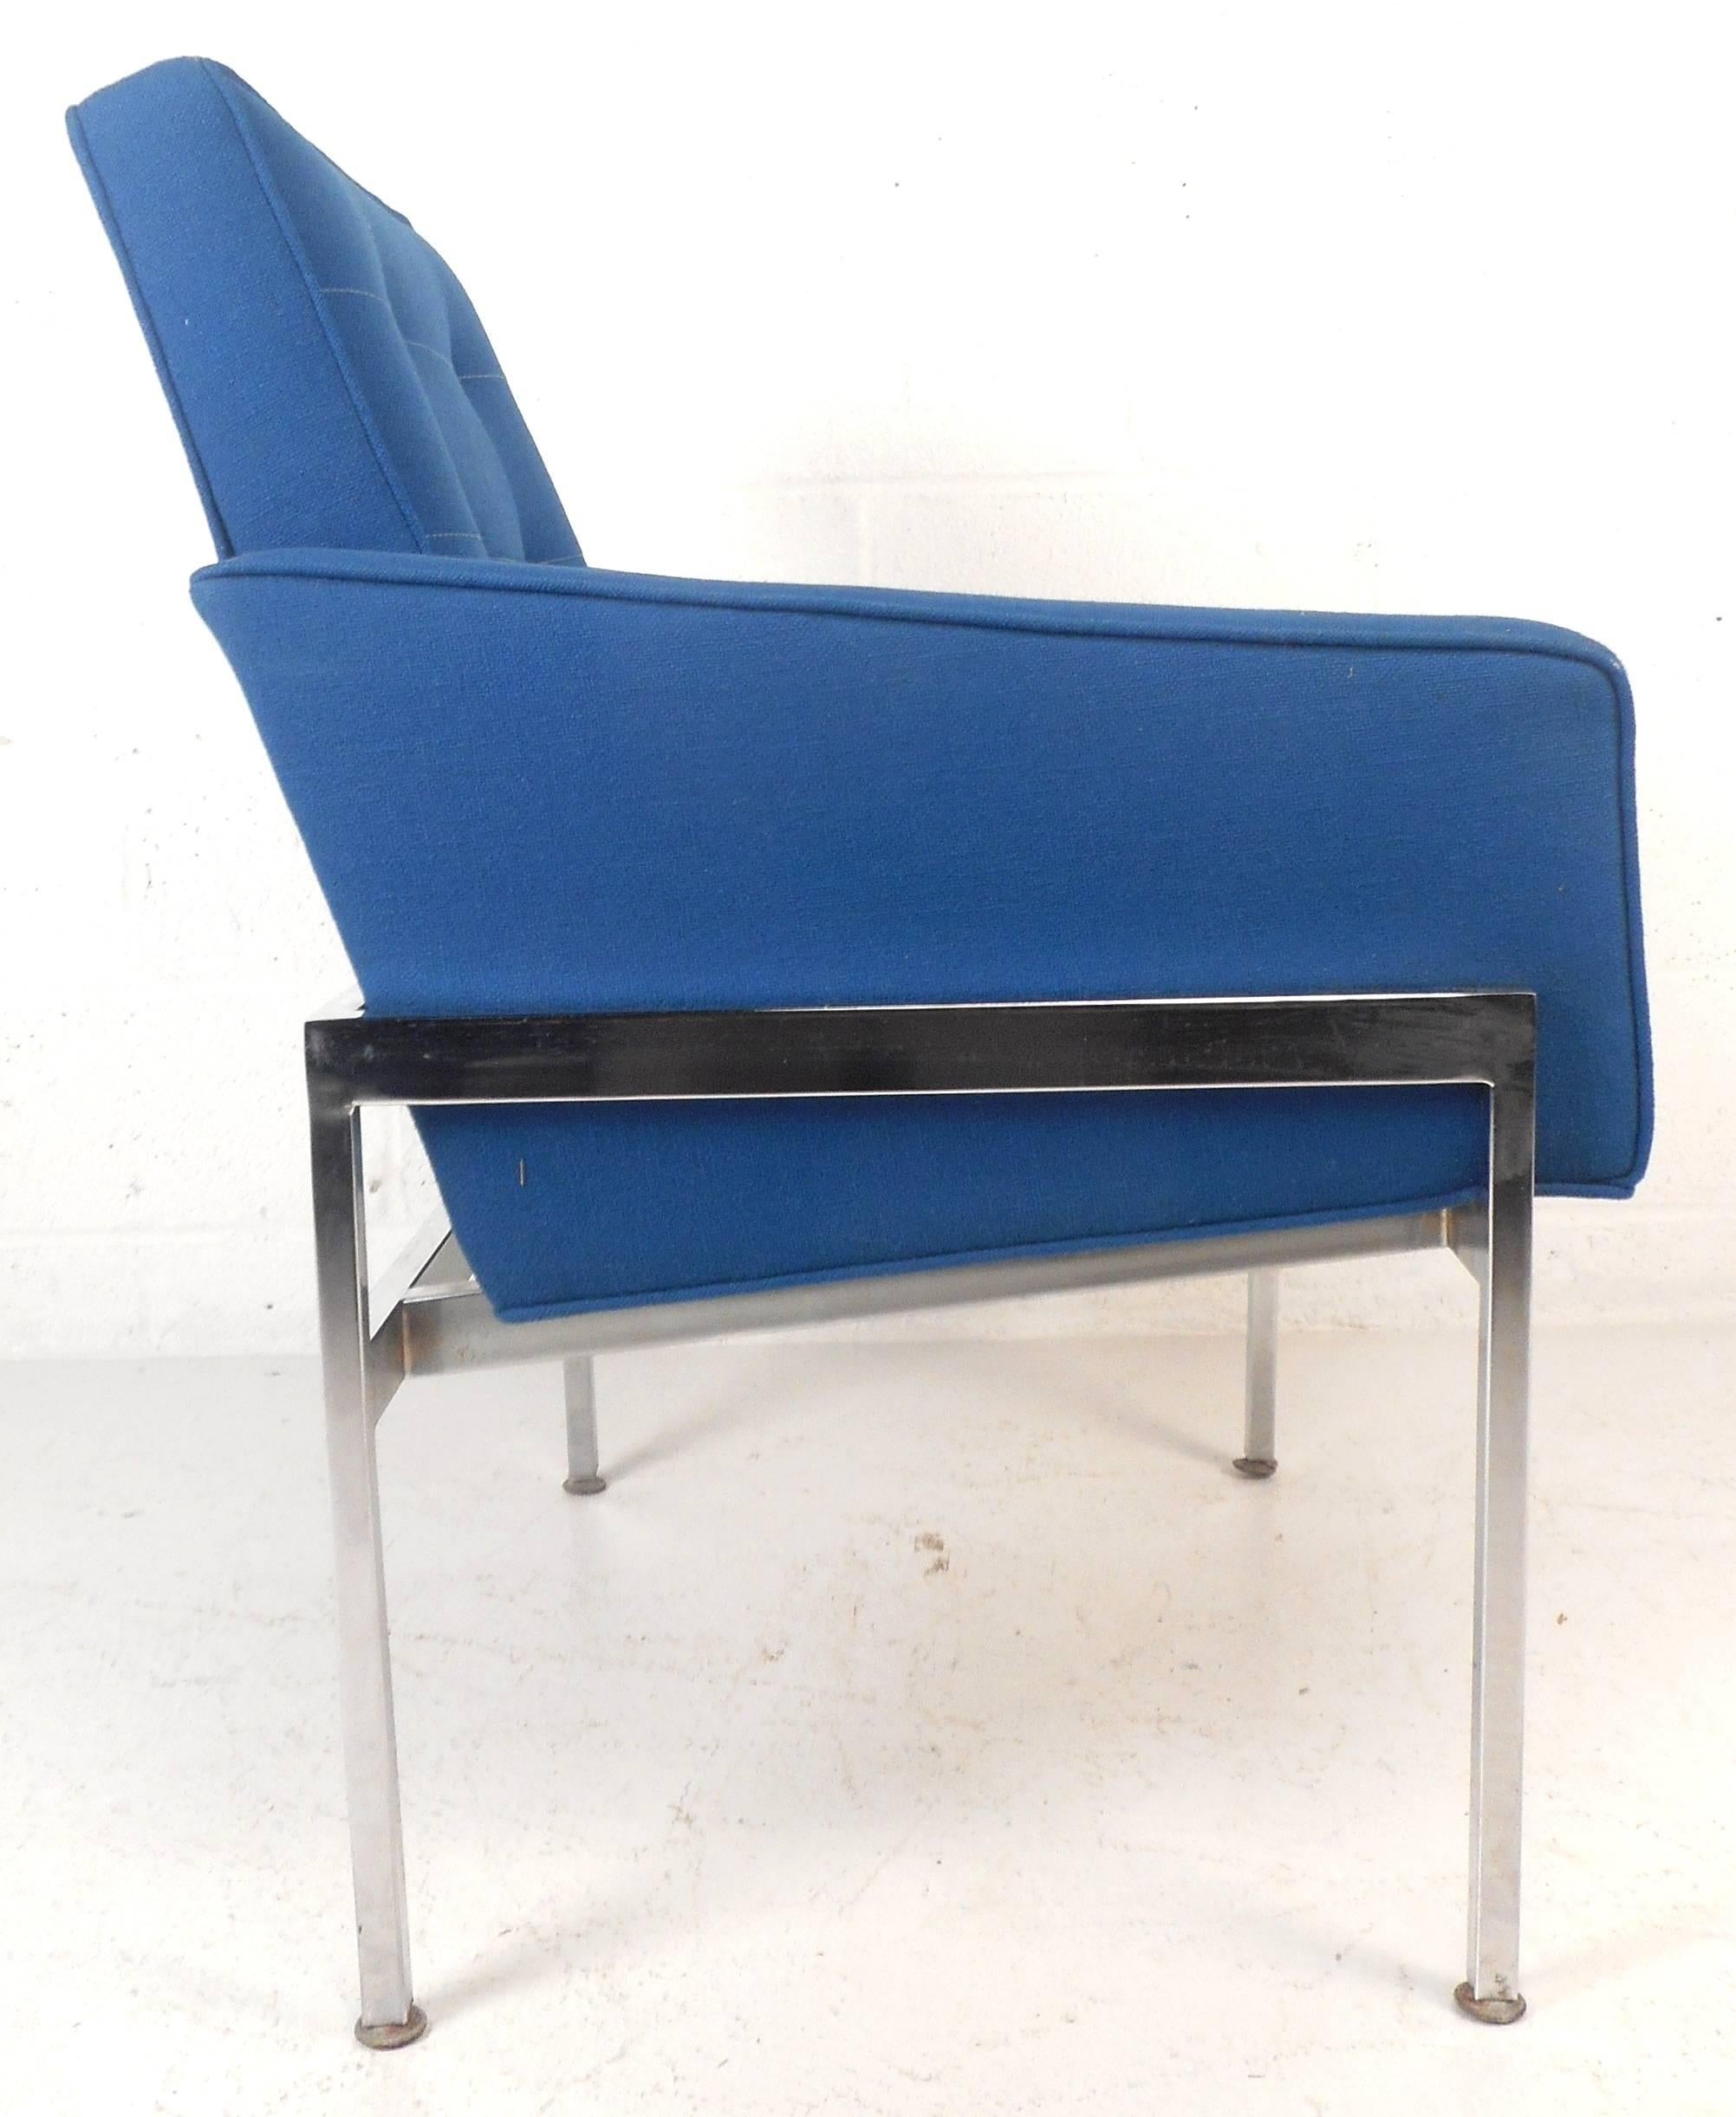 Elegant pair of Mid-Century Modern lounge chairs feature heavy chrome frames with royal blue tufted upholstery. Sleek design with angled backrest and low armrests for added comfort. Soft fabric and thick padded seating make these Mid-Century lounge